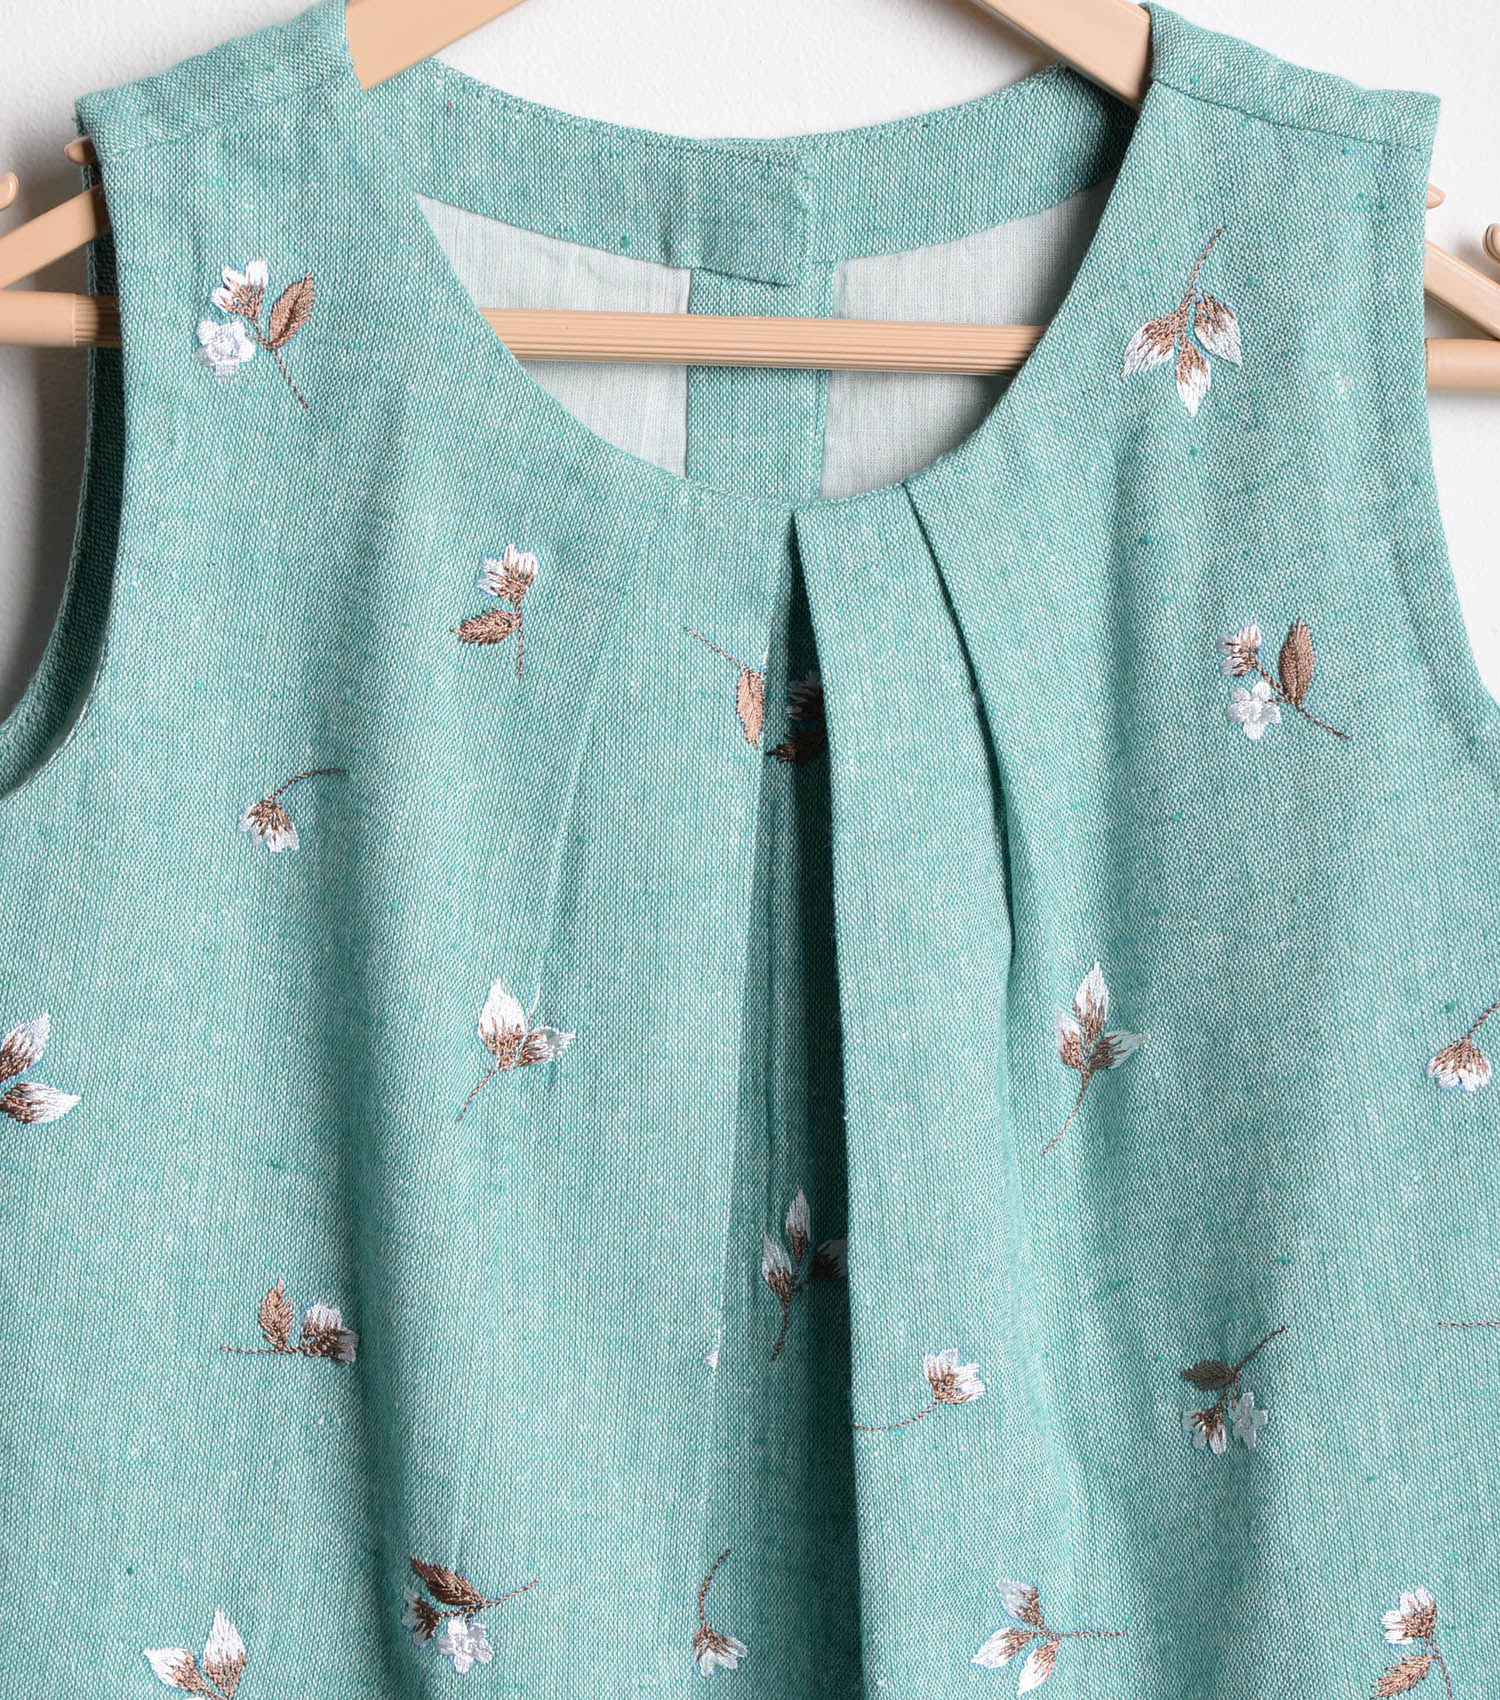 Teal chambray embroidered dress